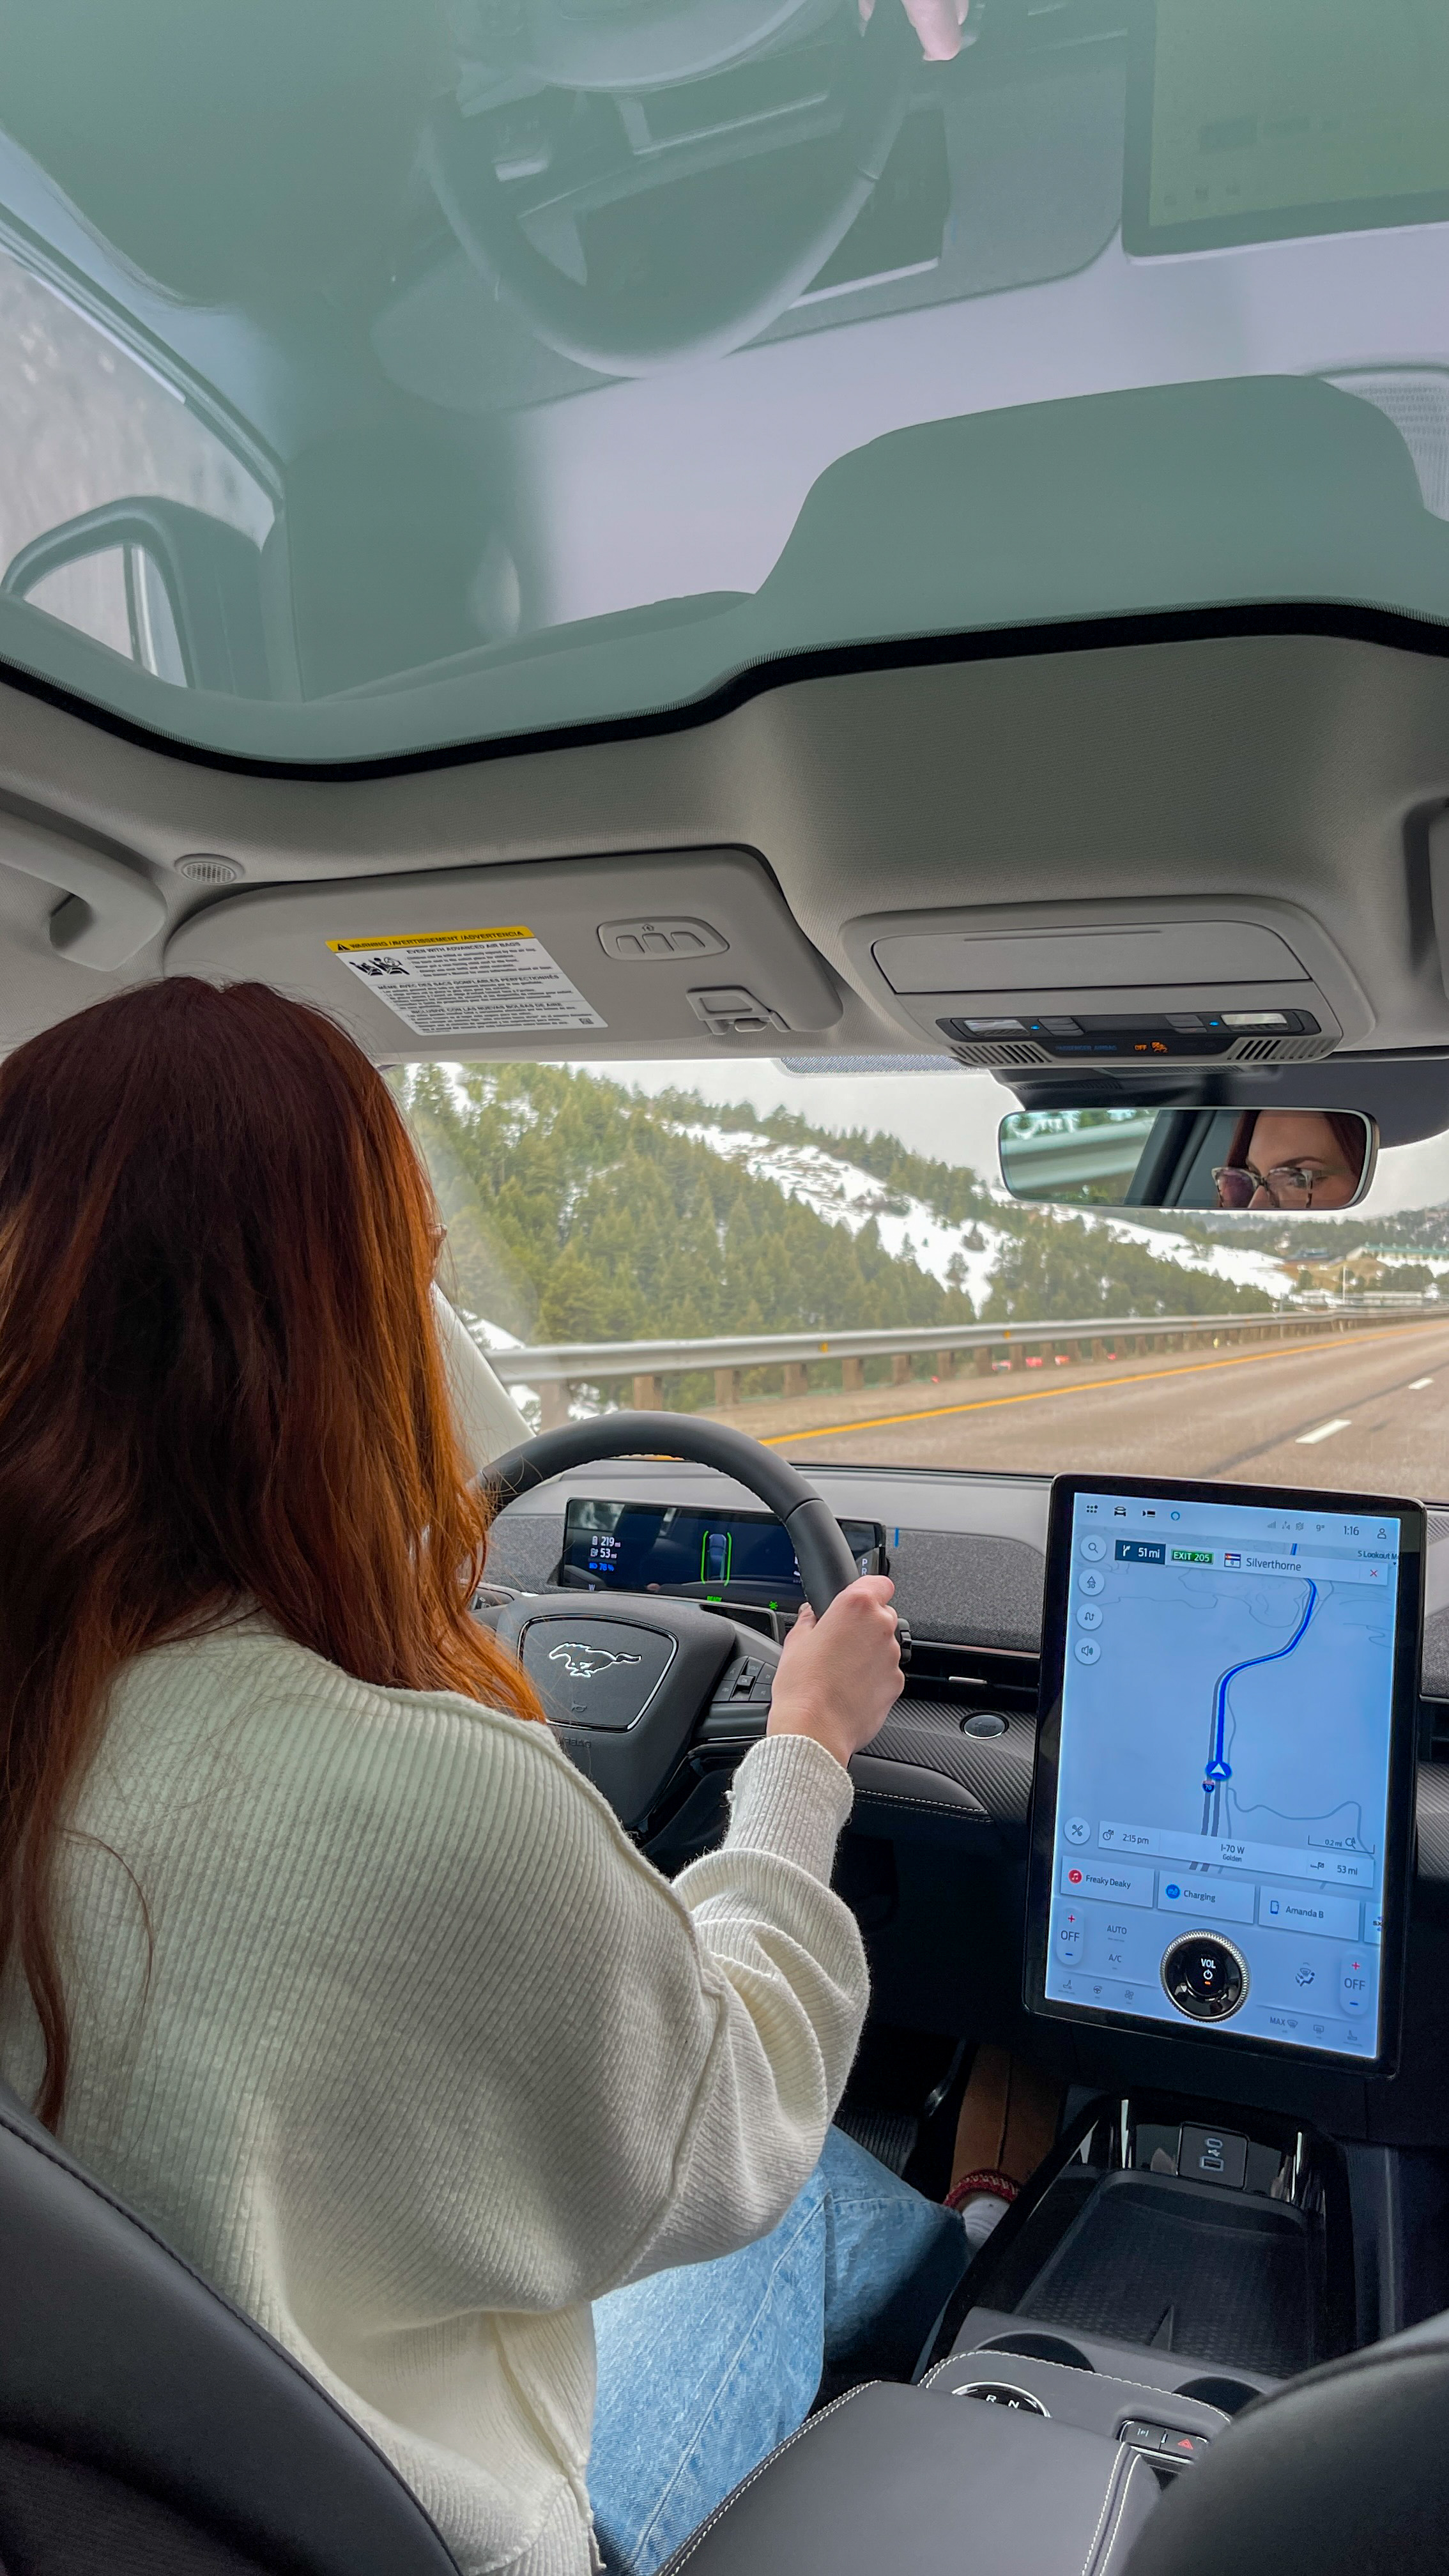 Amanda Bittner driving her Ford Mustang Mach-E EV, viewed from the rear-right passenger seat. The touchscreen status console is visible, showing GPS navigation.